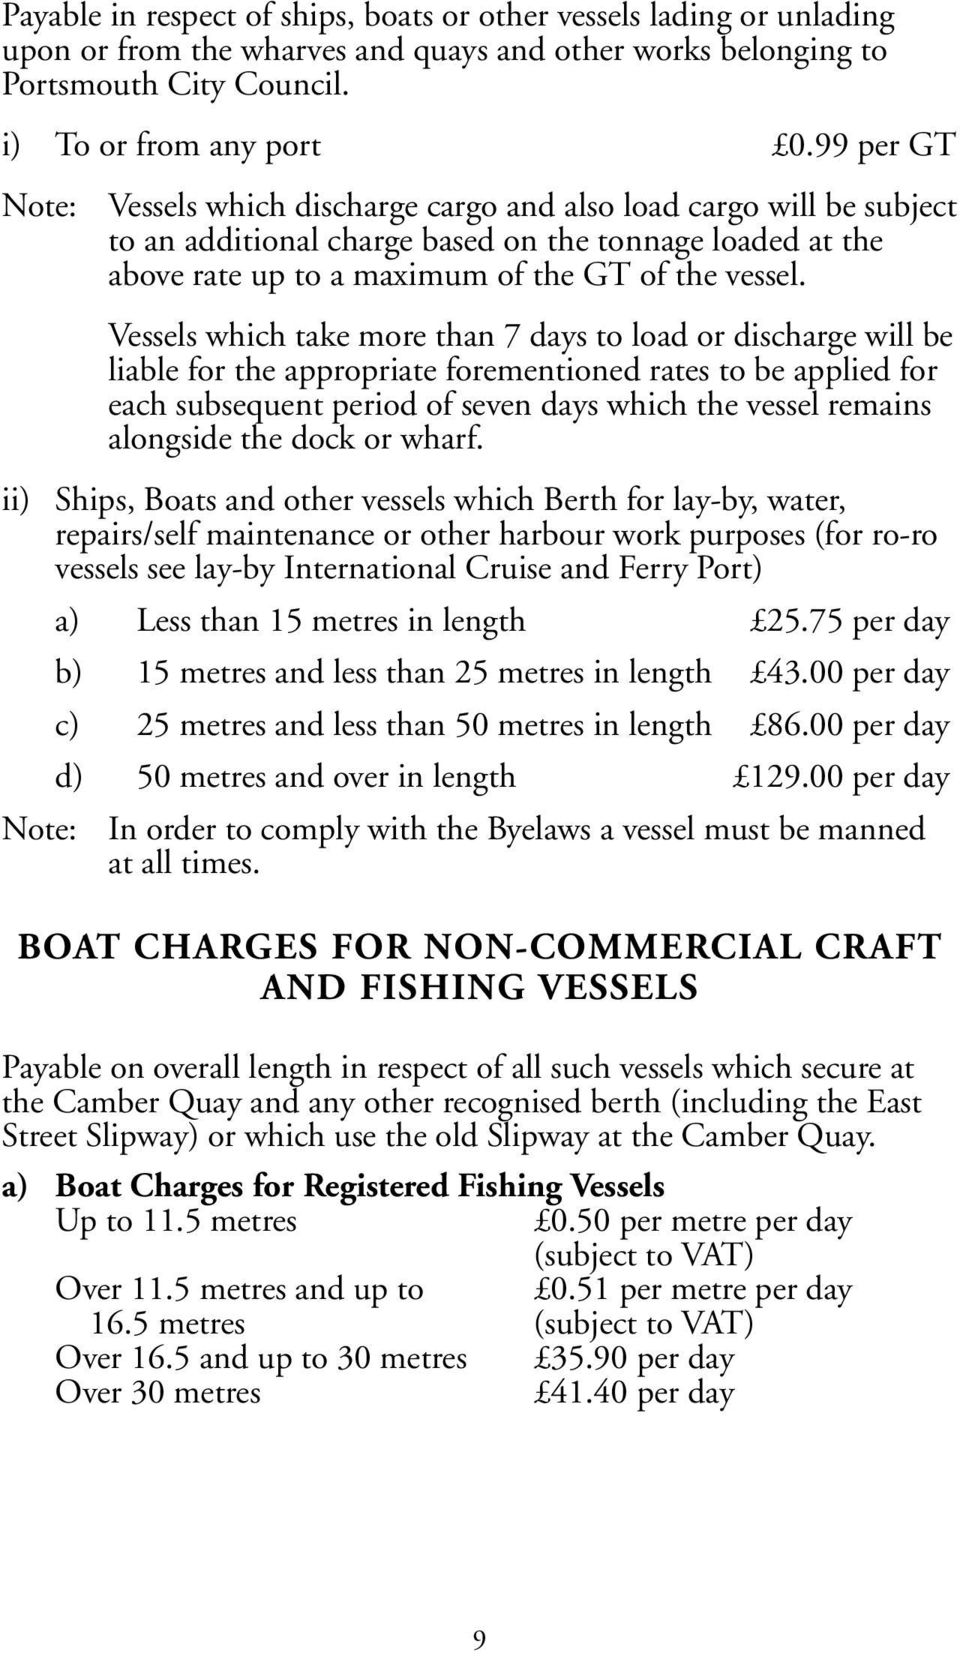 Vessels which take more than 7 days to load or discharge will be liable for the appropriate forementioned rates to be applied for each subsequent period of seven days which the vessel remains